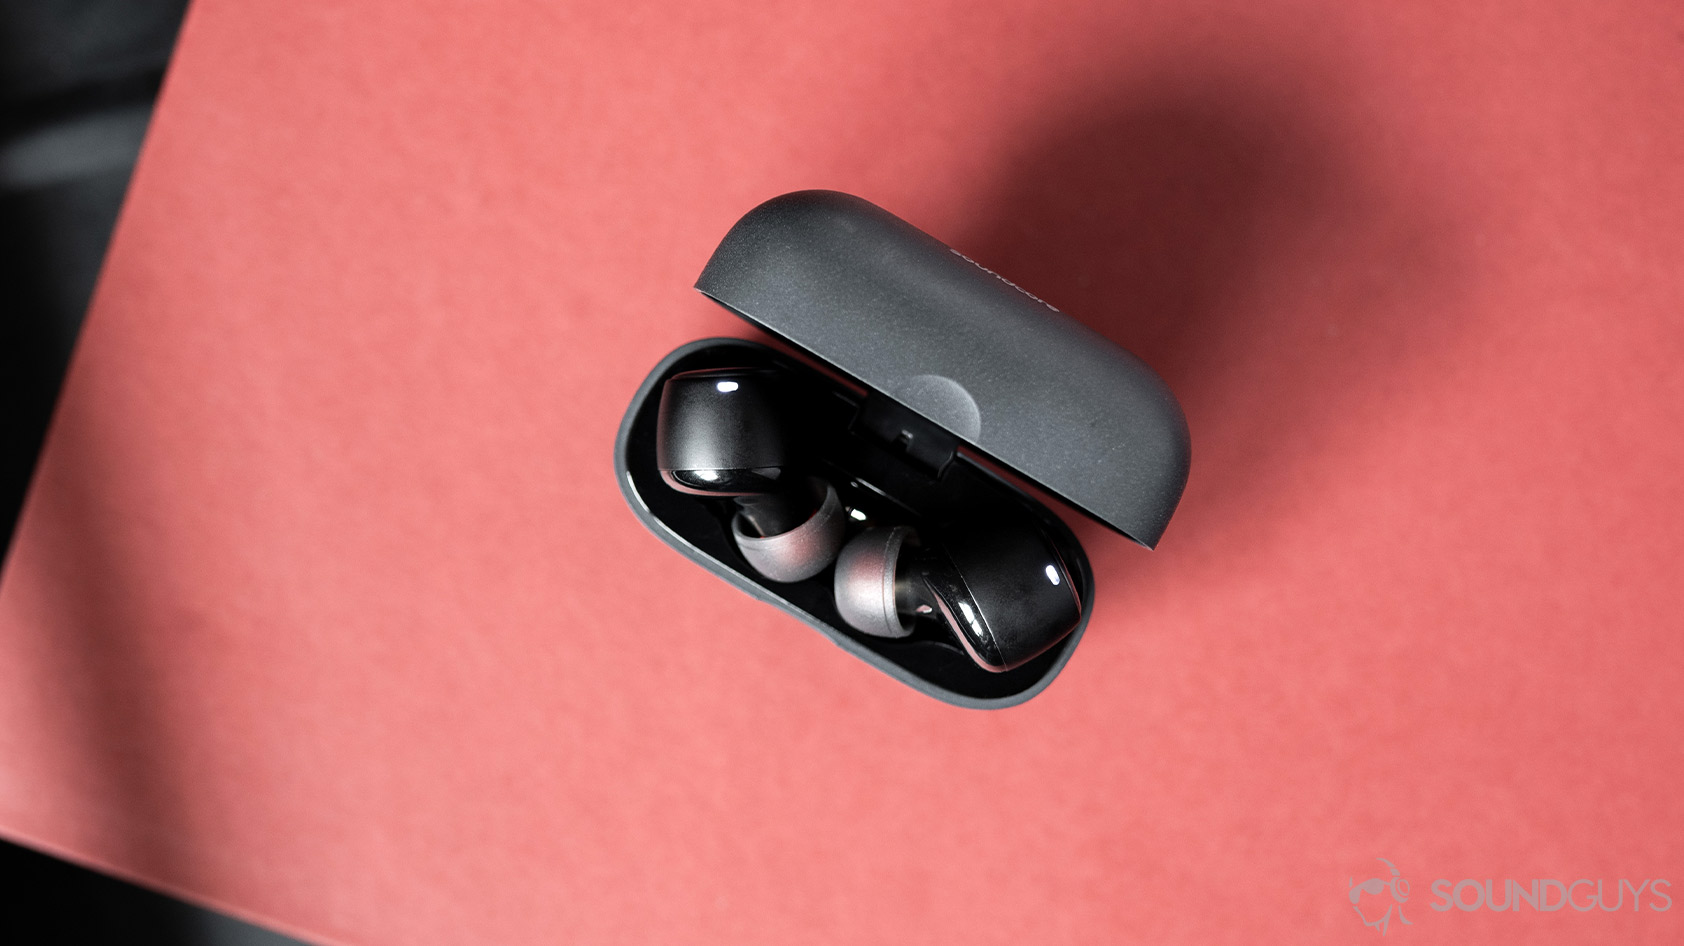 Anker SoundCore Liberty Air 2 aerial true wireless earbuds charging case open